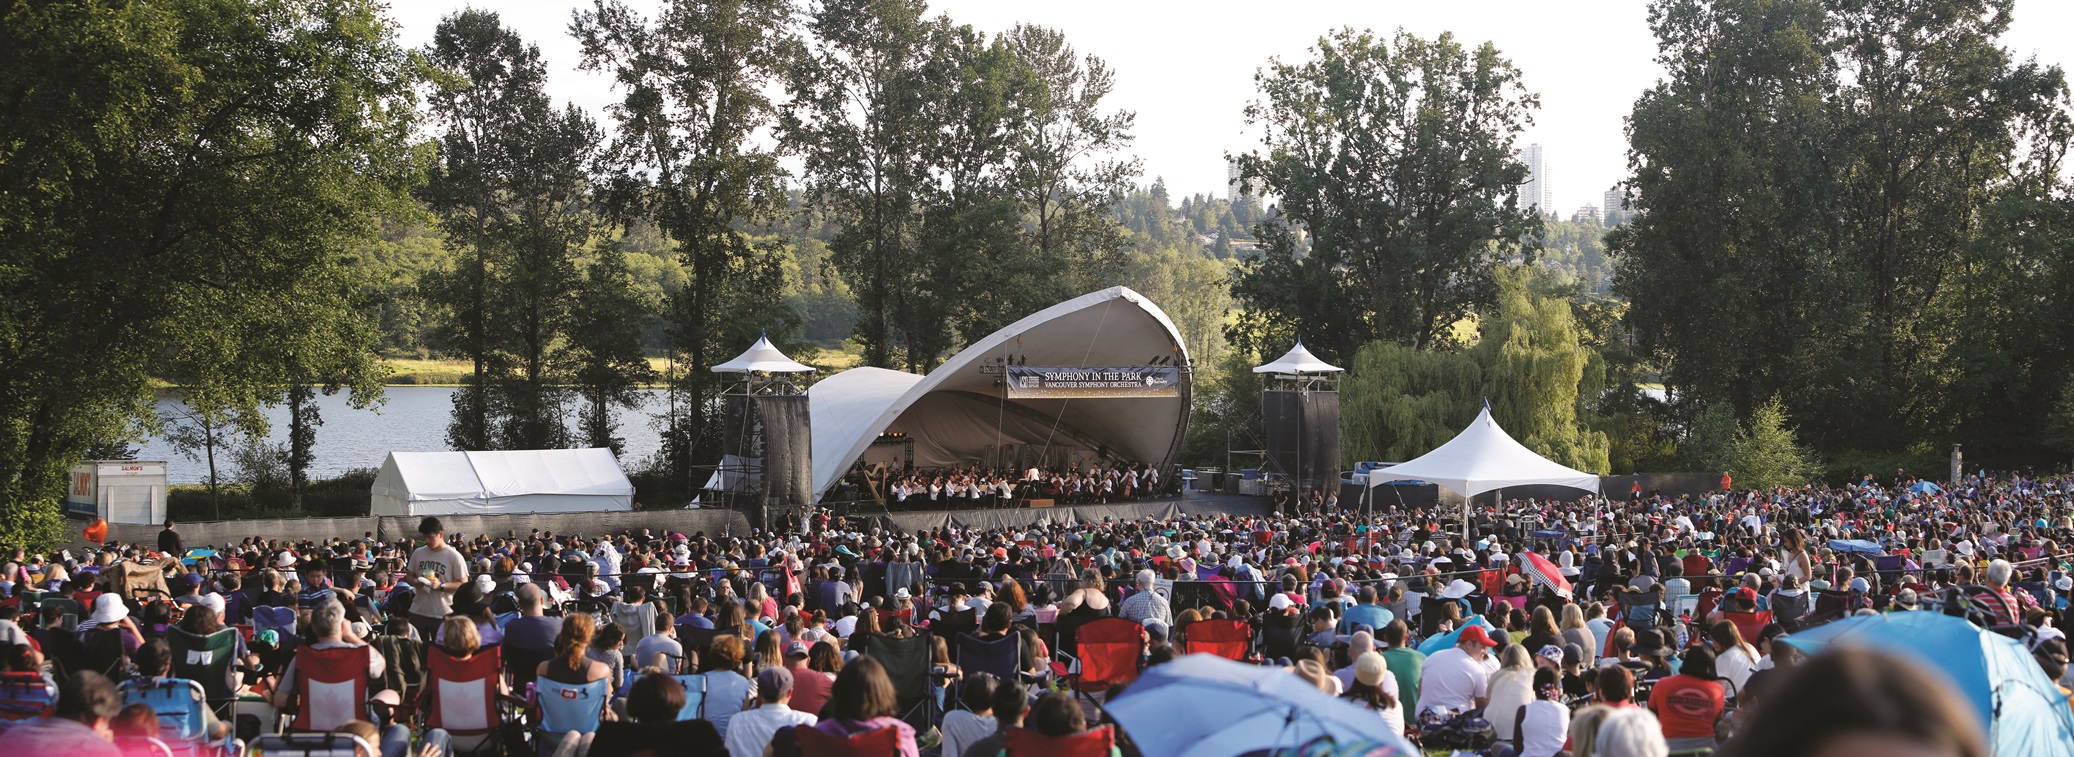 Panorama of the VSO tent and concert goers at the Symphony in the Park